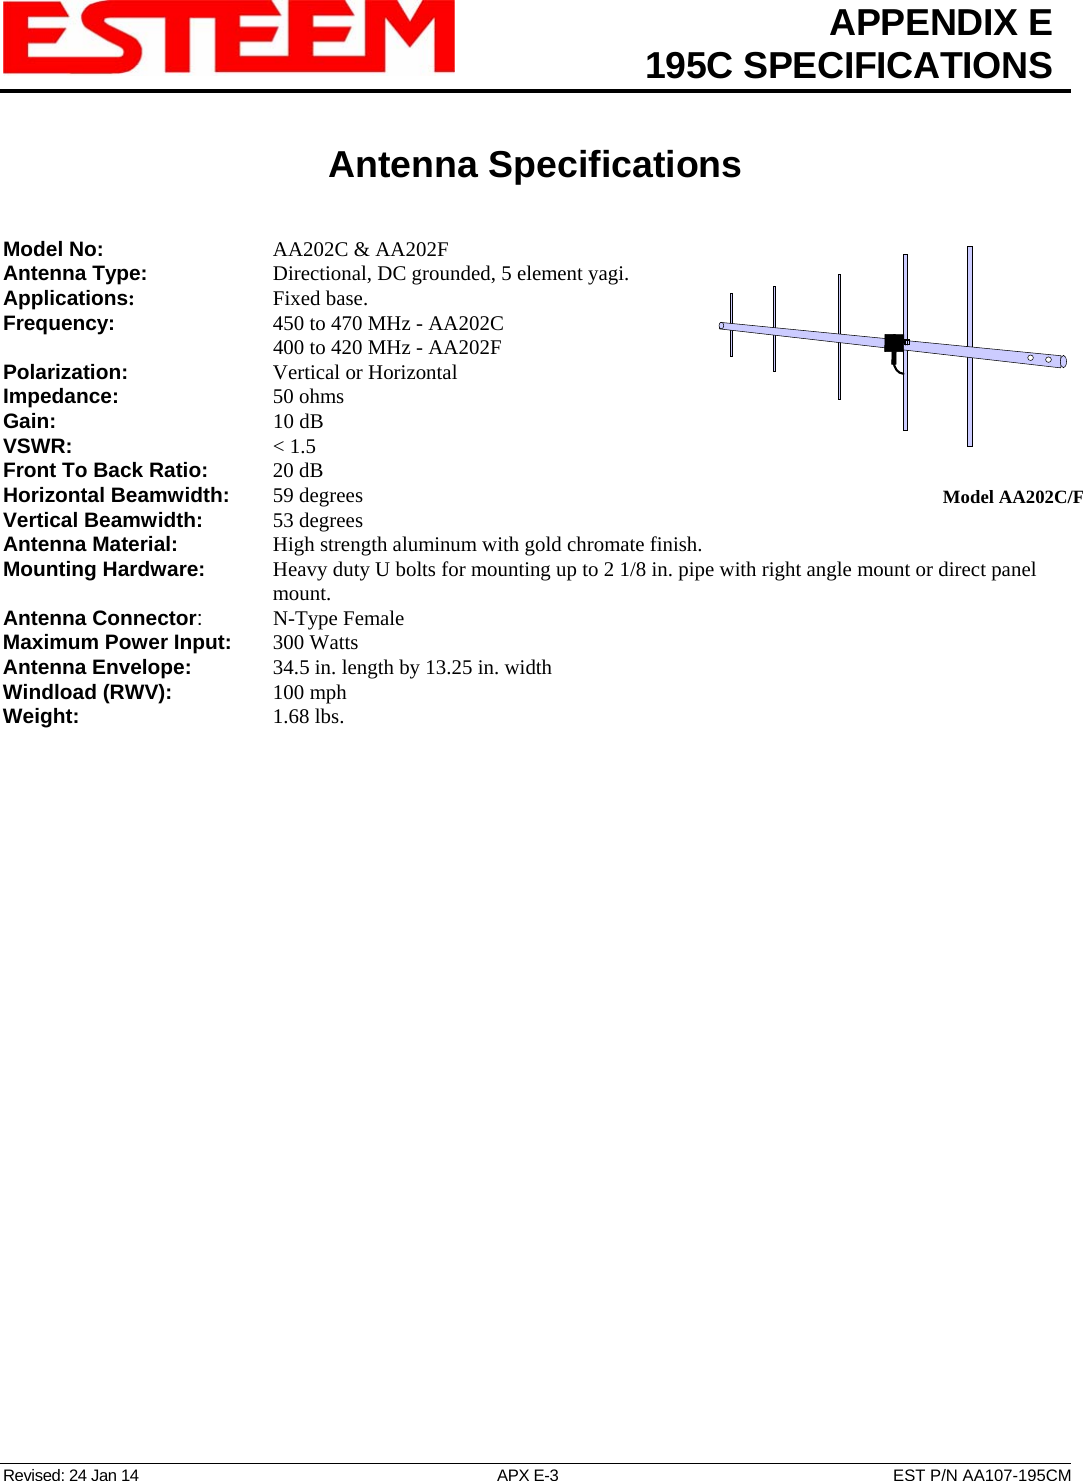  APPENDIX E  195C SPECIFICATIONS   Antenna Specifications   Revised: 24 Jan 14  APX E-3  EST P/N AA107-195CM  Model AA202C/FModel No:    AA202C &amp; AA202F Antenna Type:      Directional, DC grounded, 5 element yagi.  Applications:    Fixed base. Frequency:    450 to 470 MHz - AA202C       400 to 420 MHz - AA202F  Polarization:    Vertical or Horizontal Impedance:    50 ohms Gain:     10 dB VSWR:      &lt; 1.5  Front To Back Ratio:   20 dB Horizontal Beamwidth:  59 degrees Vertical Beamwidth:      53 degrees Antenna Material:     High strength aluminum with gold chromate finish.  Mounting Hardware:      Heavy duty U bolts for mounting up to 2 1/8 in. pipe with right angle mount or direct panel mount. Antenna Connector:   N-Type Female Maximum Power Input: 300 Watts Antenna Envelope:    34.5 in. length by 13.25 in. width Windload (RWV):   100 mph Weight:     1.68 lbs.        